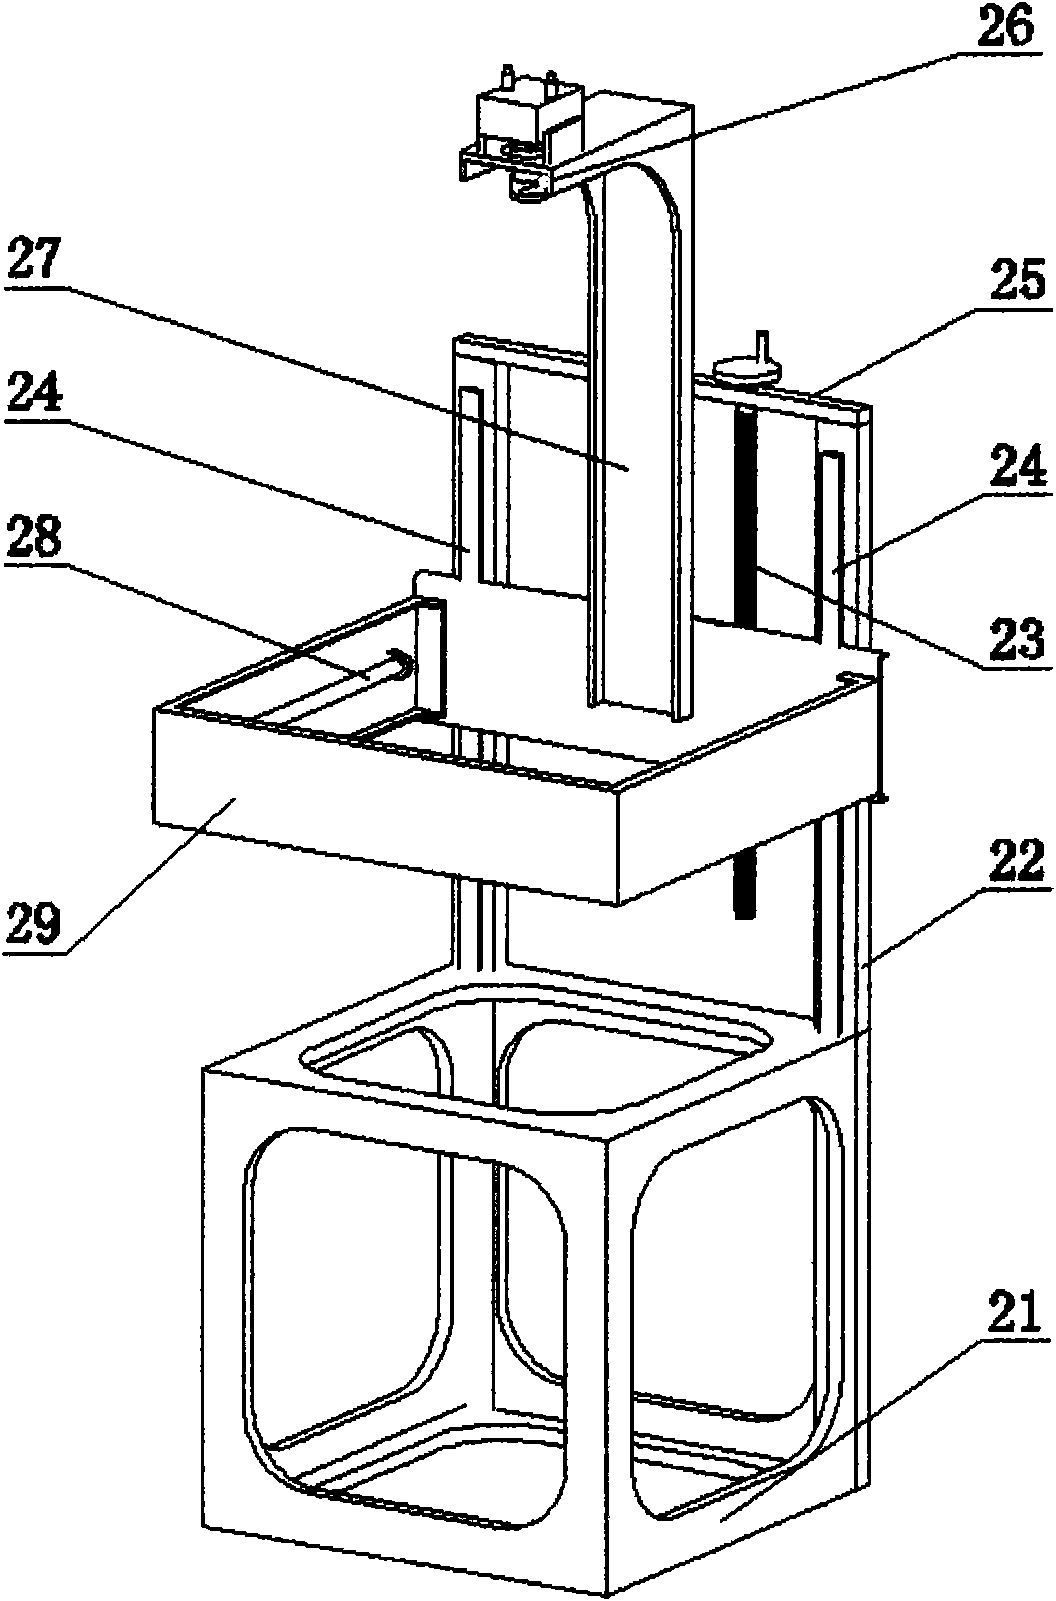 Method and device for sorting wood according to colors and wood grains